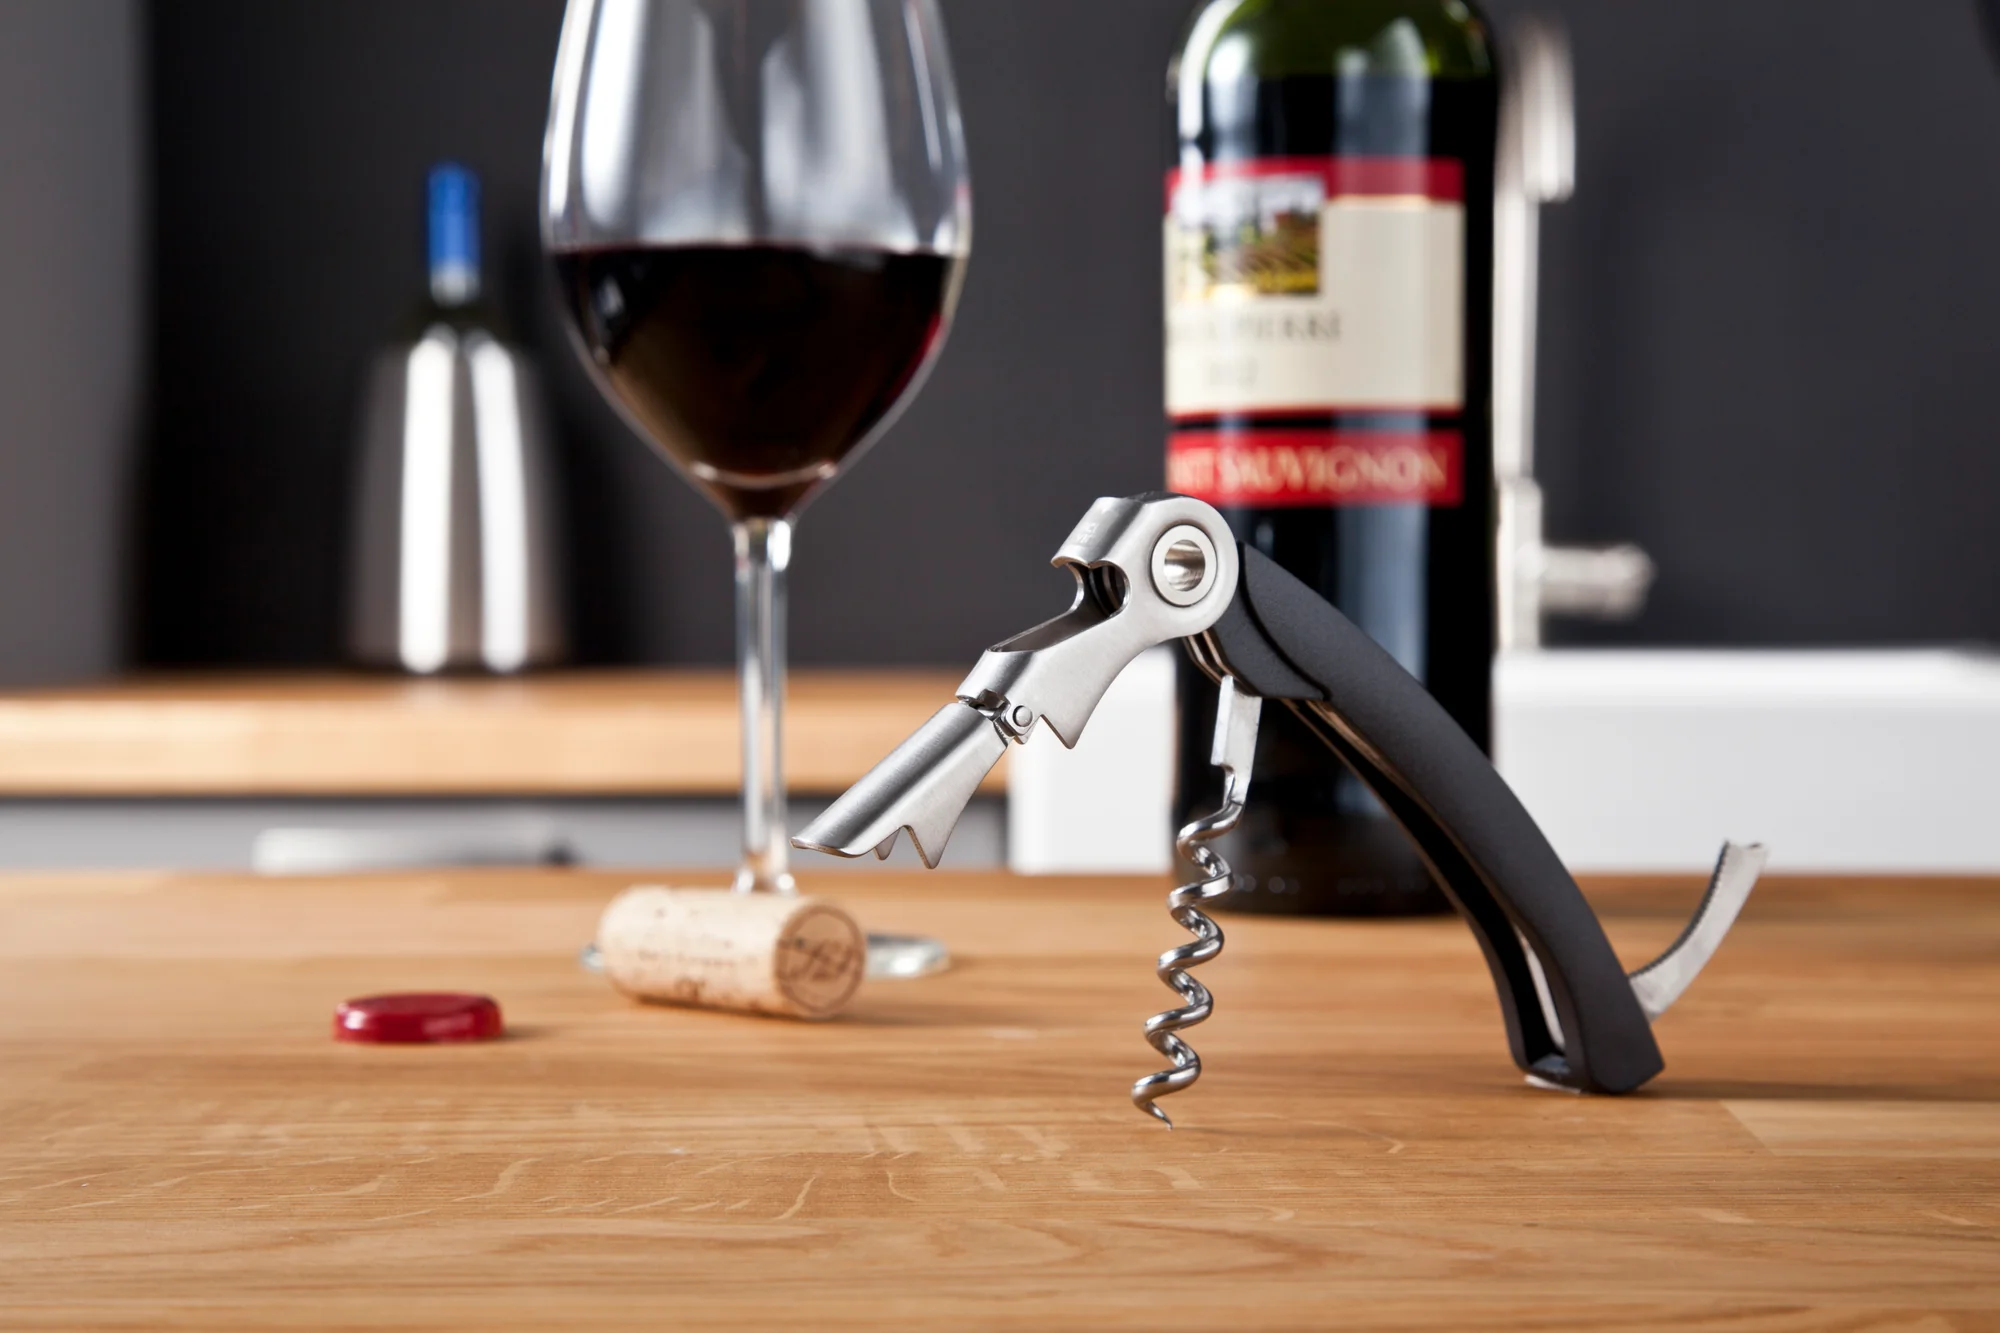 How To Use A Double-Hinged Corkscrew